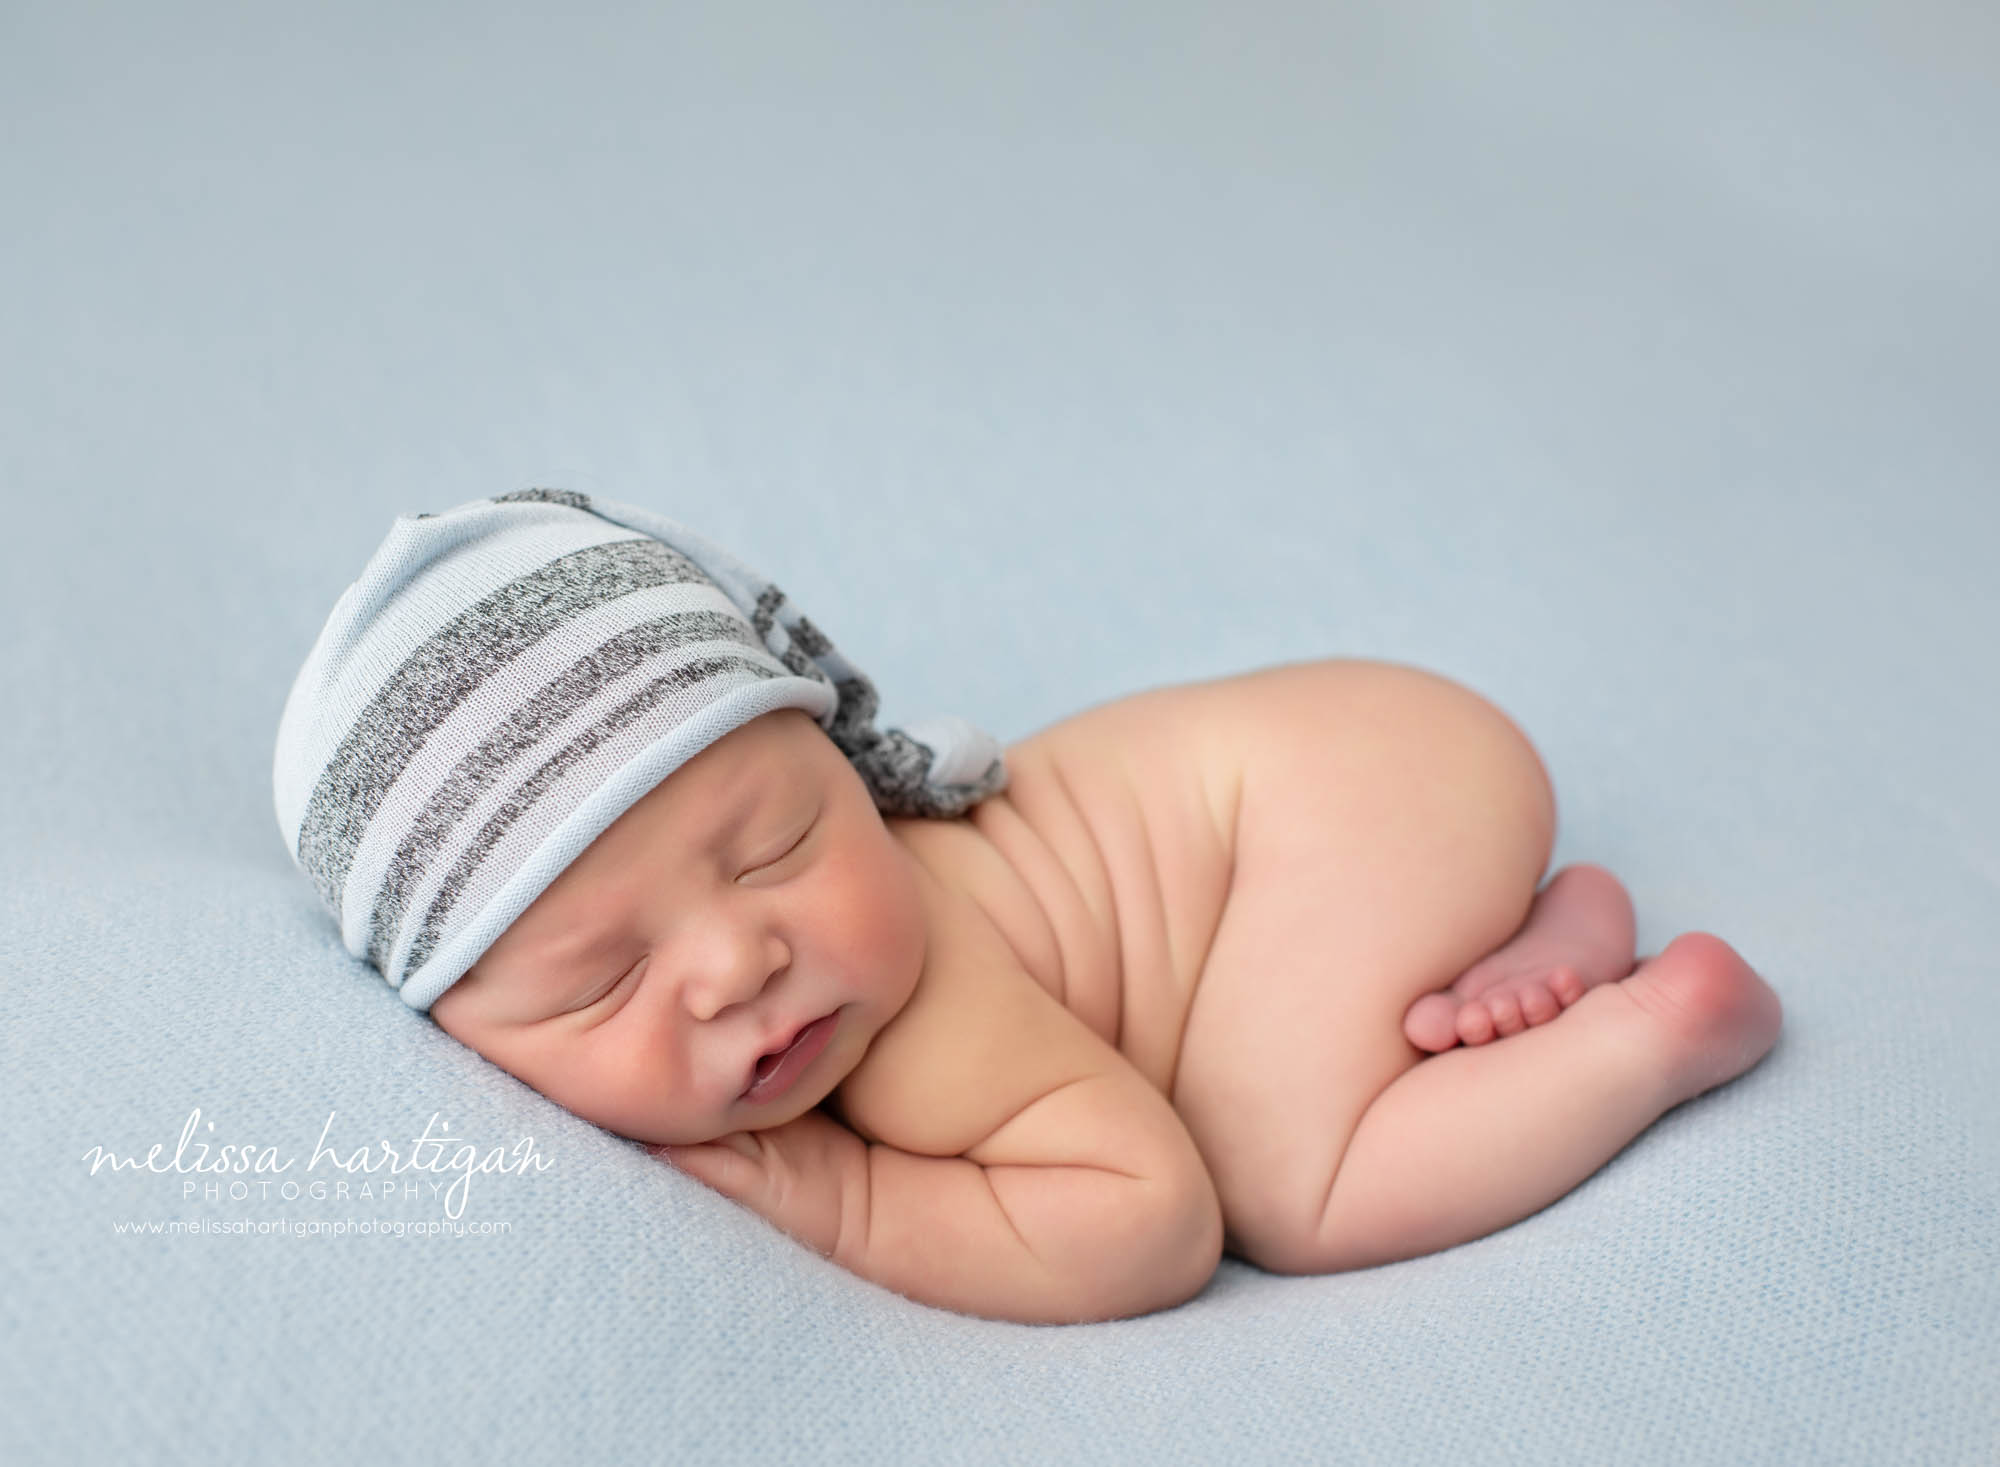 Baby boy posed on light blue backdrop with light blue and grey sleepy cap on